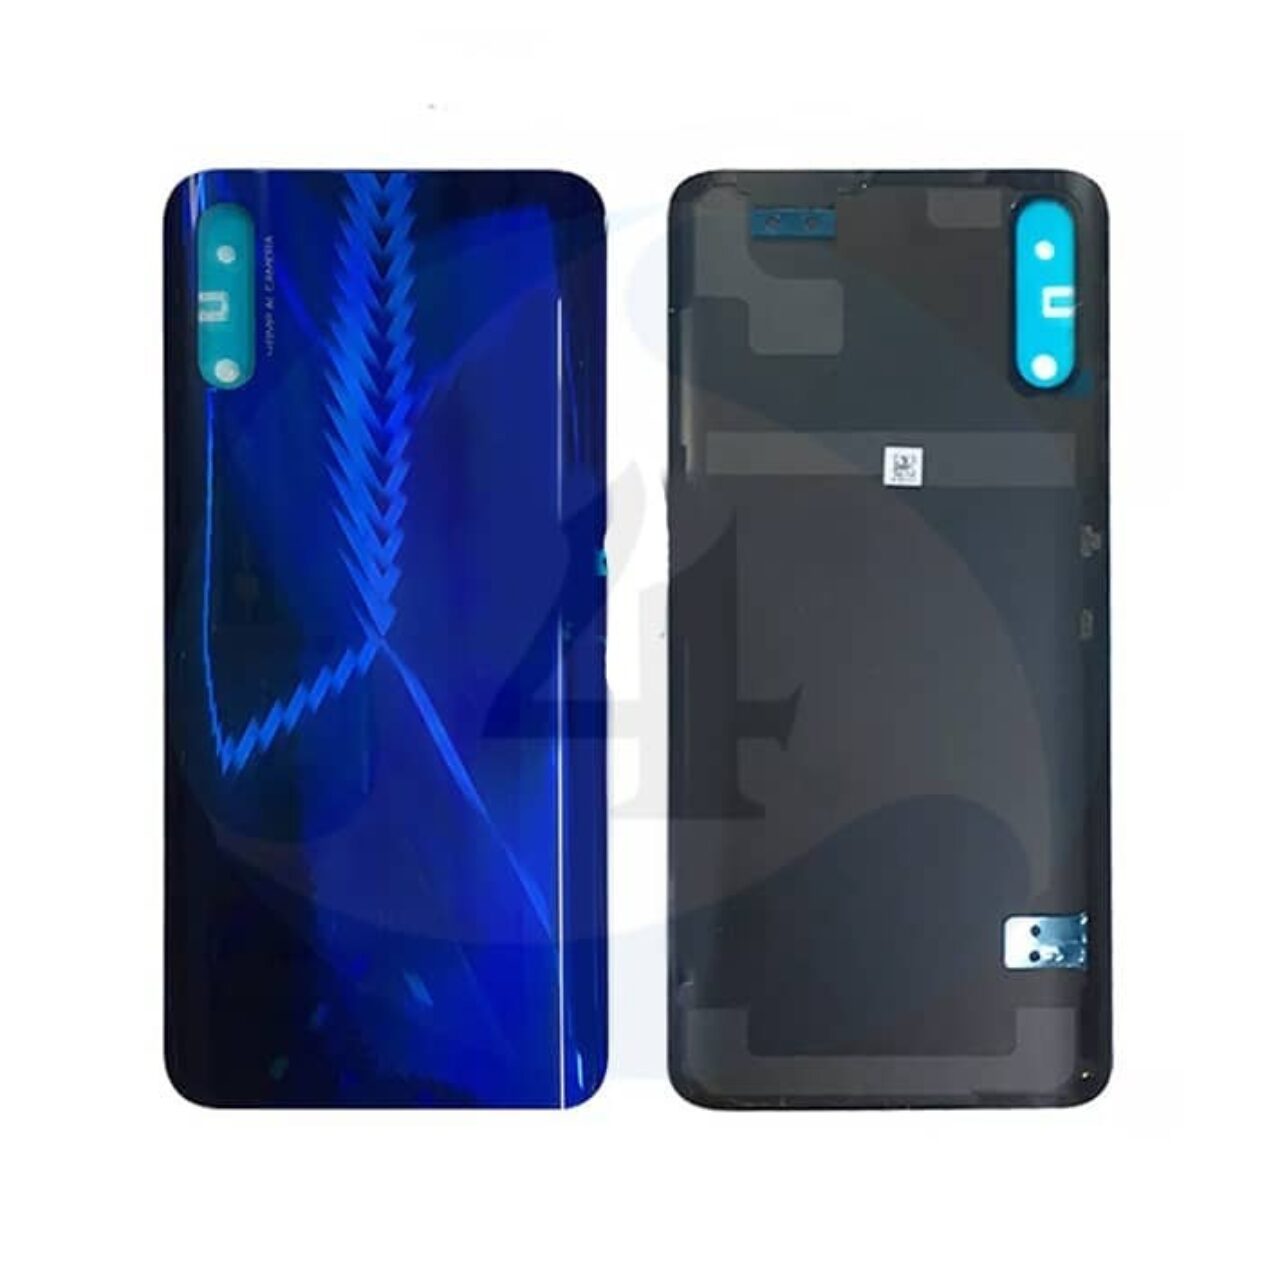 Backcover Blue For Huawei Honor 9 X STK LX1